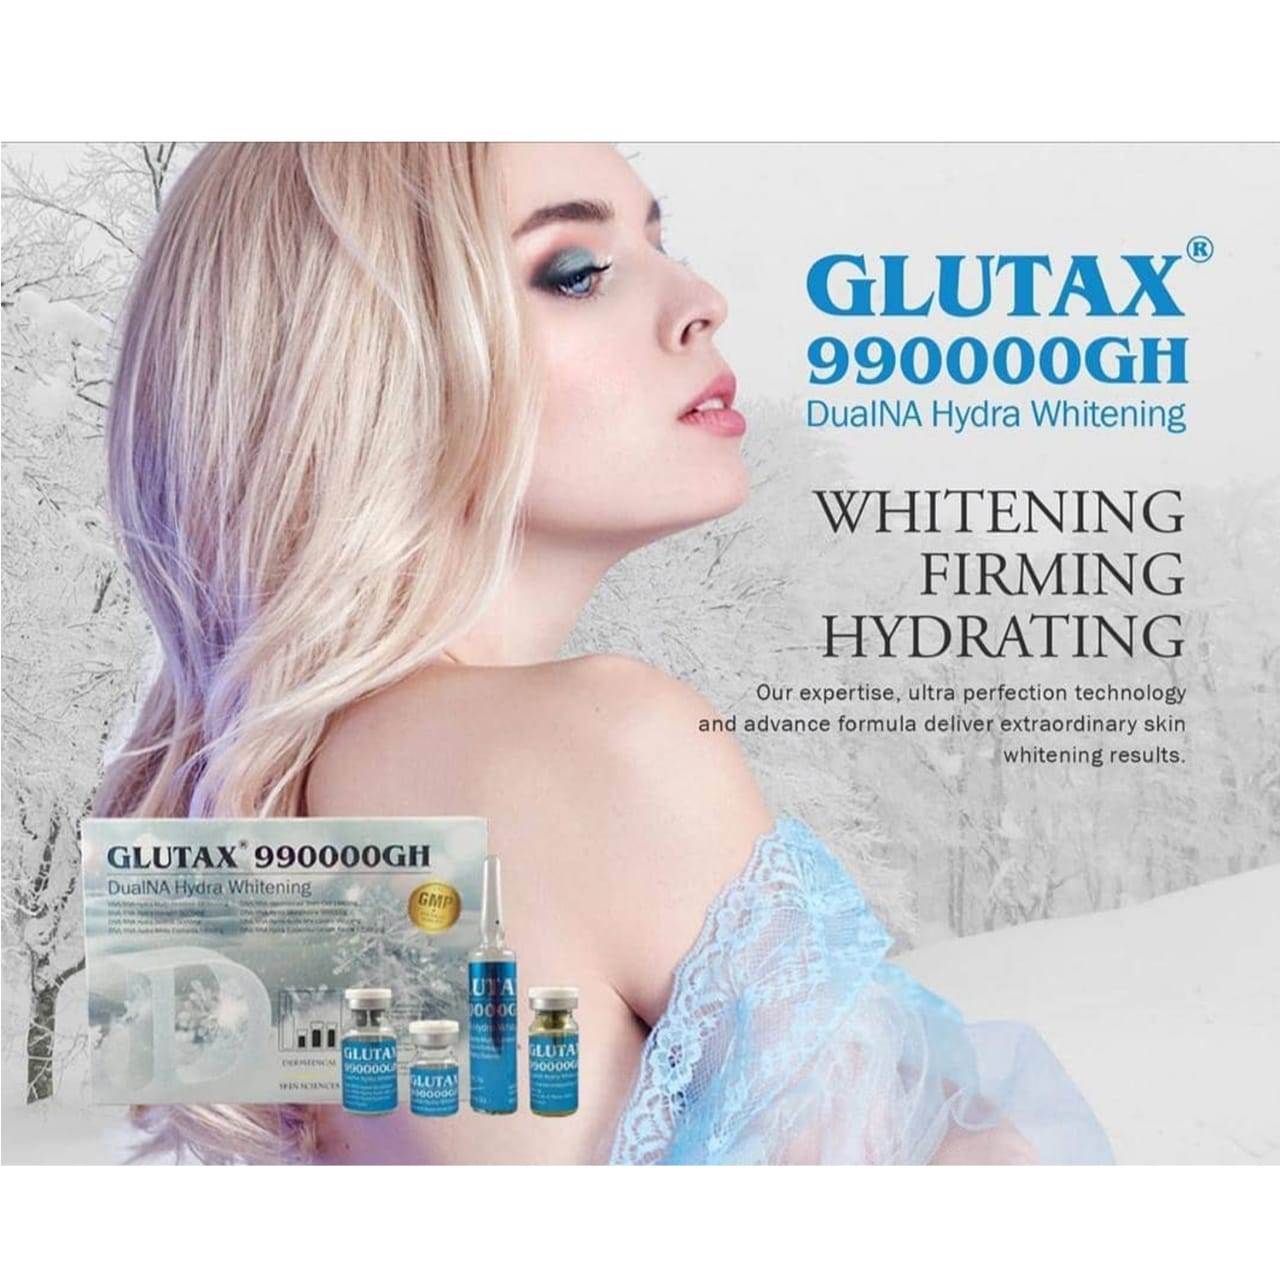 Glutax 990000gh Dual Hydra Whitening Injection reviews